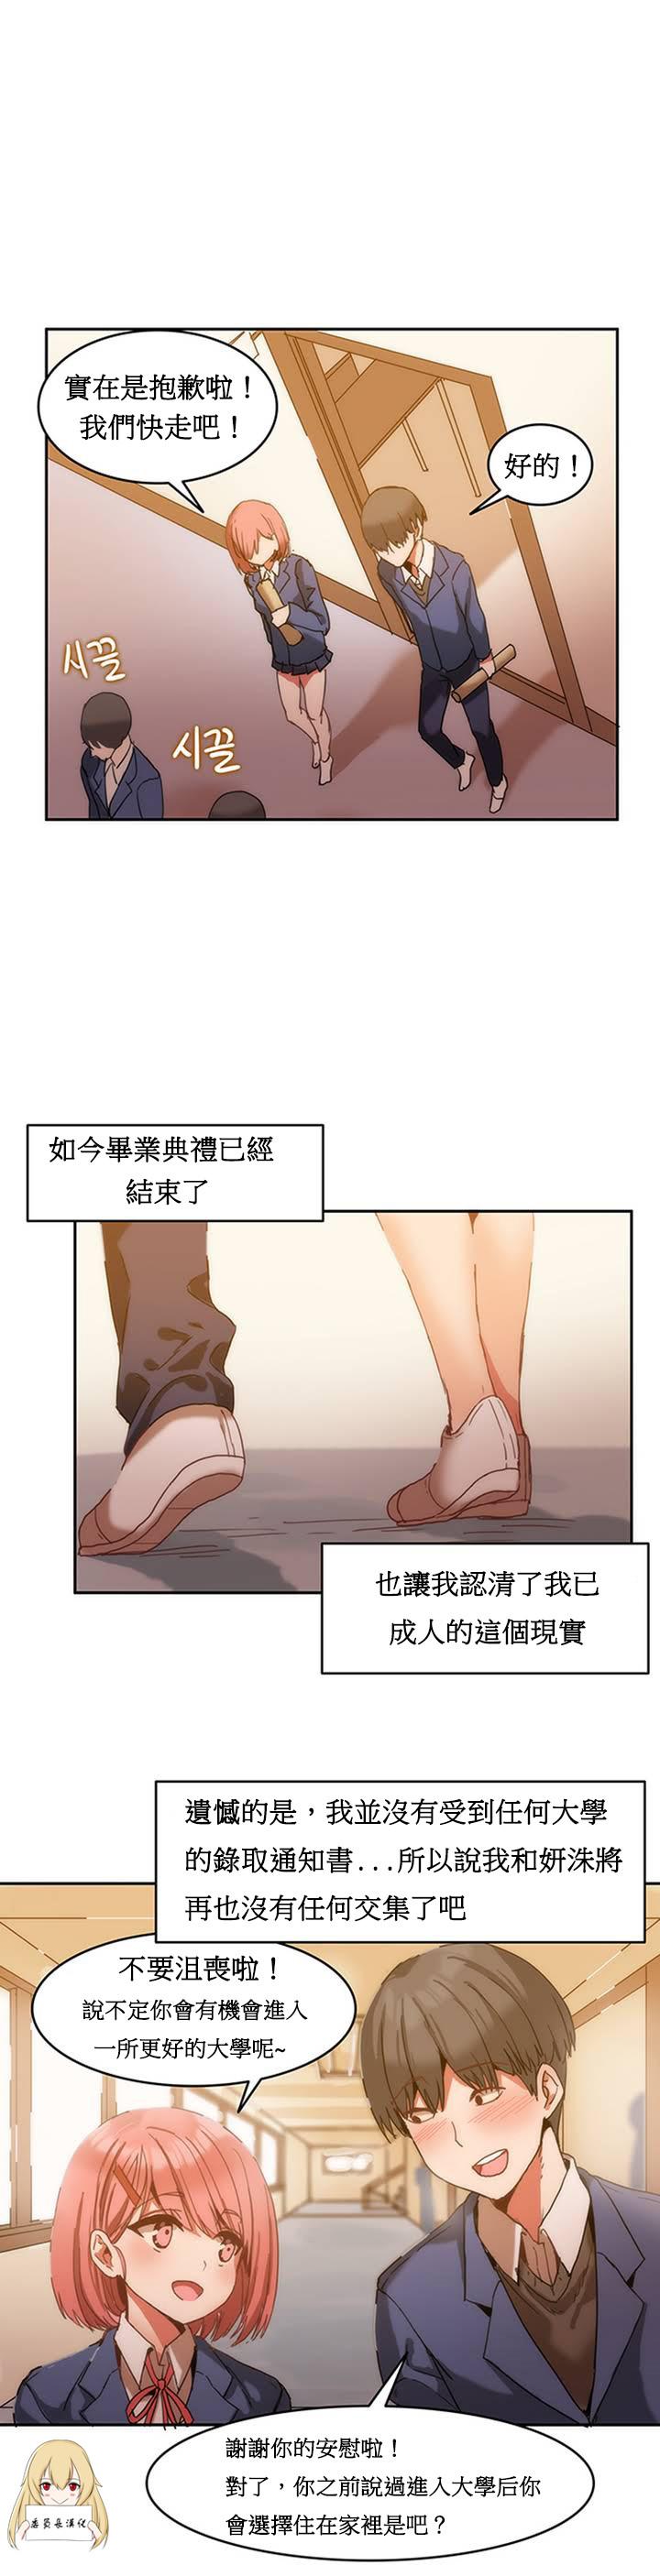 Pete Hahri's Lumpy Boardhouse Ch. 0~21【委員長個人漢化】（持續更新） Amatoriale - Page 6